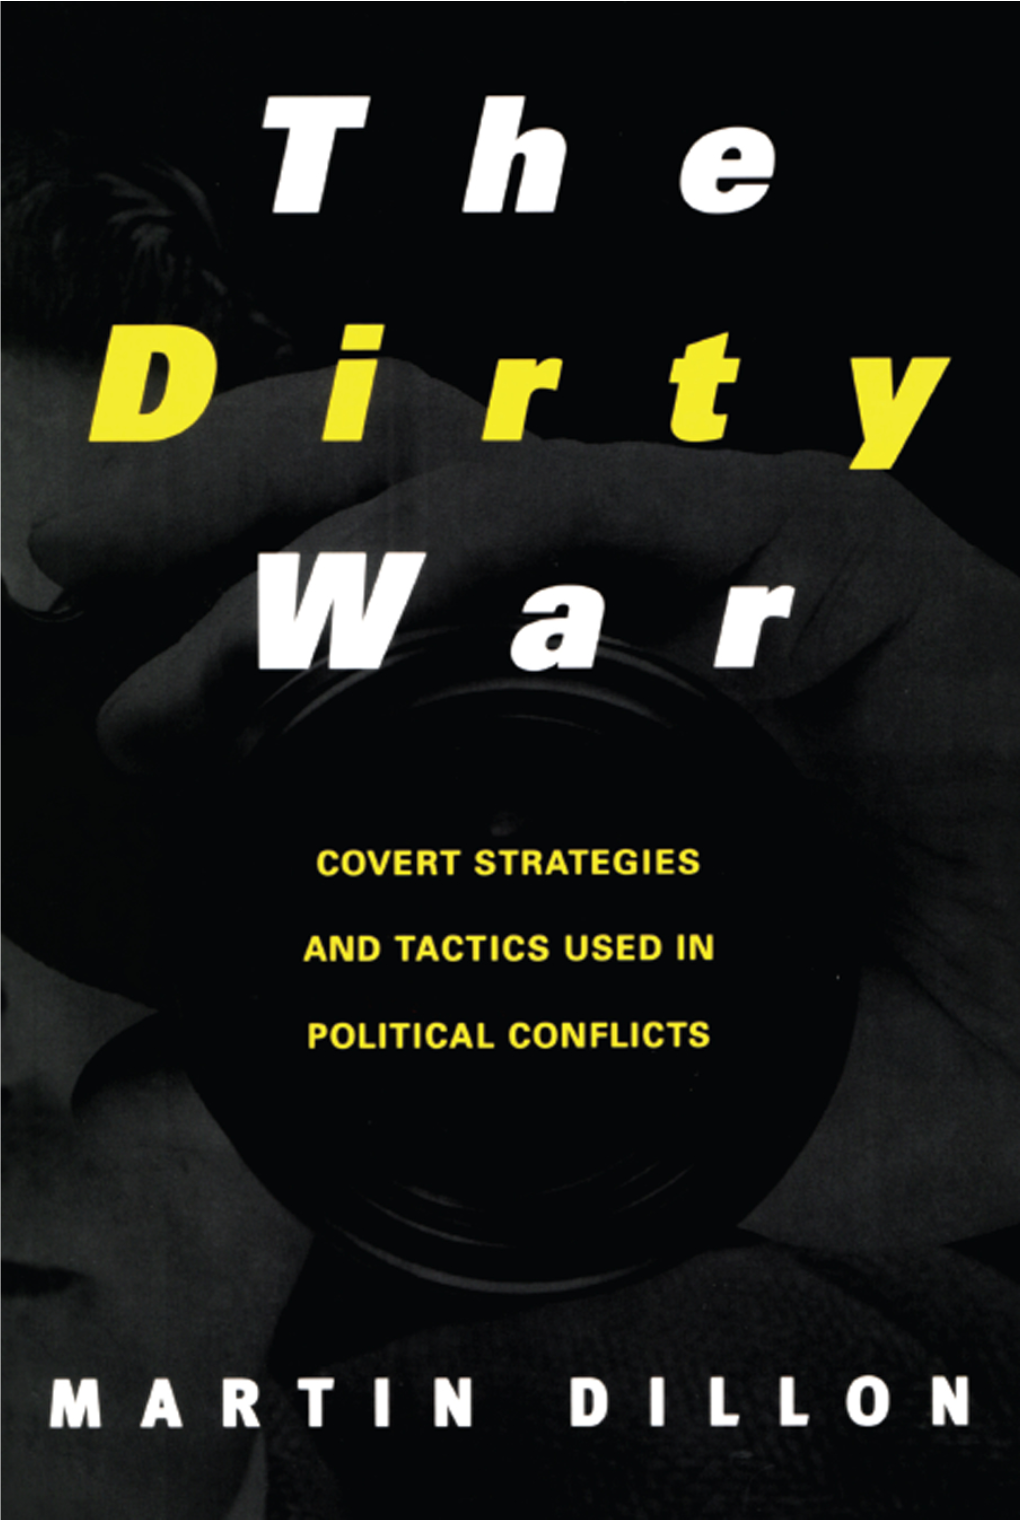 The Dirty War Also by Martin Dillon and Published by Routledge